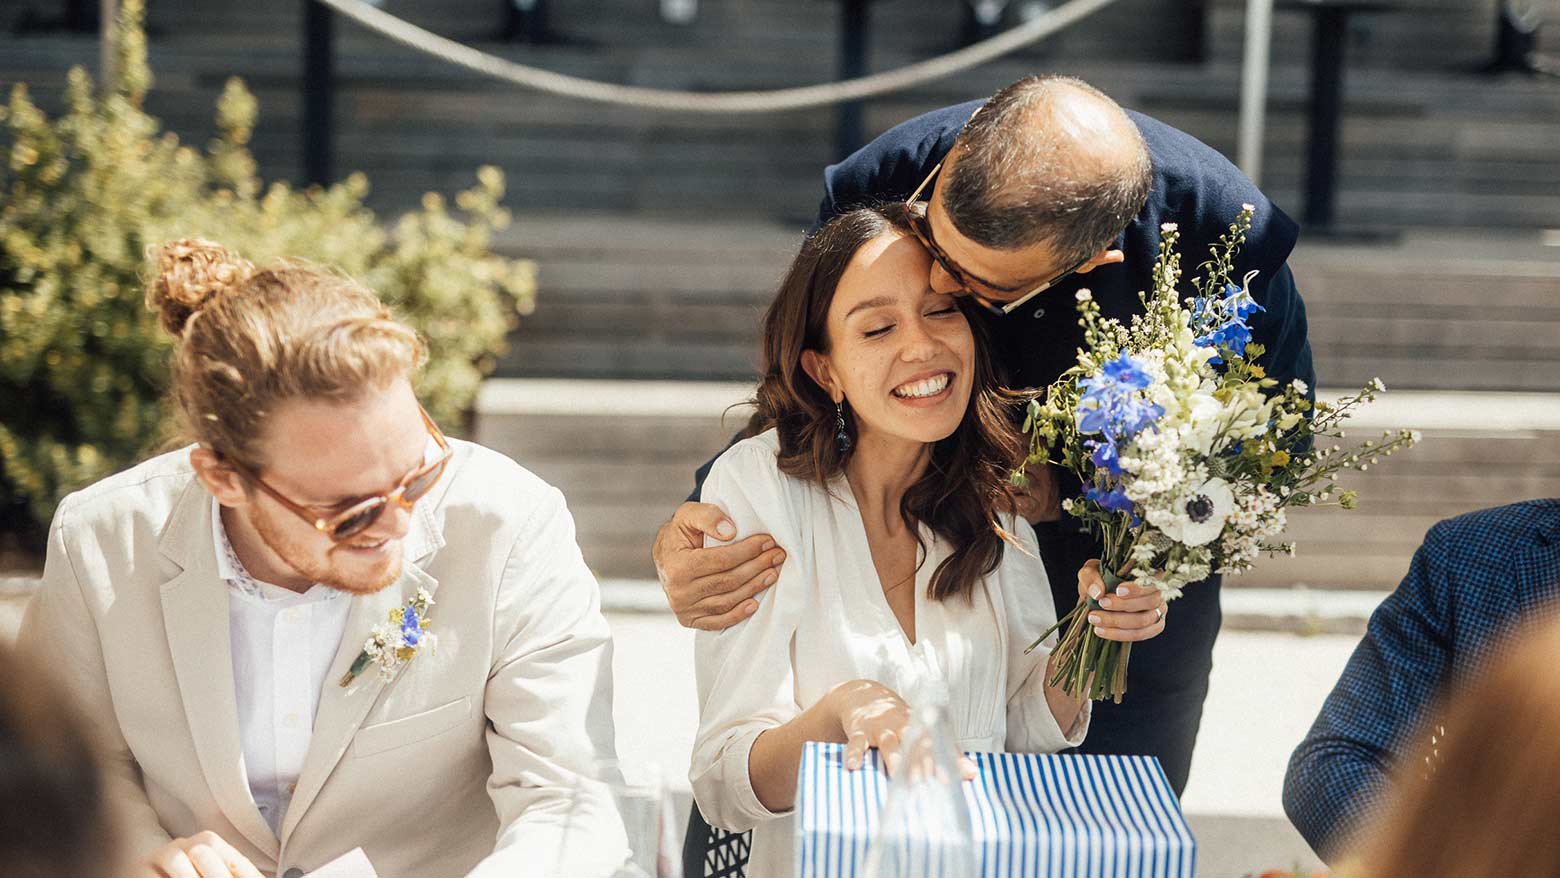 The Wedding Ring Etiquette Ceremony Guide: Who Should Hold the Rings?